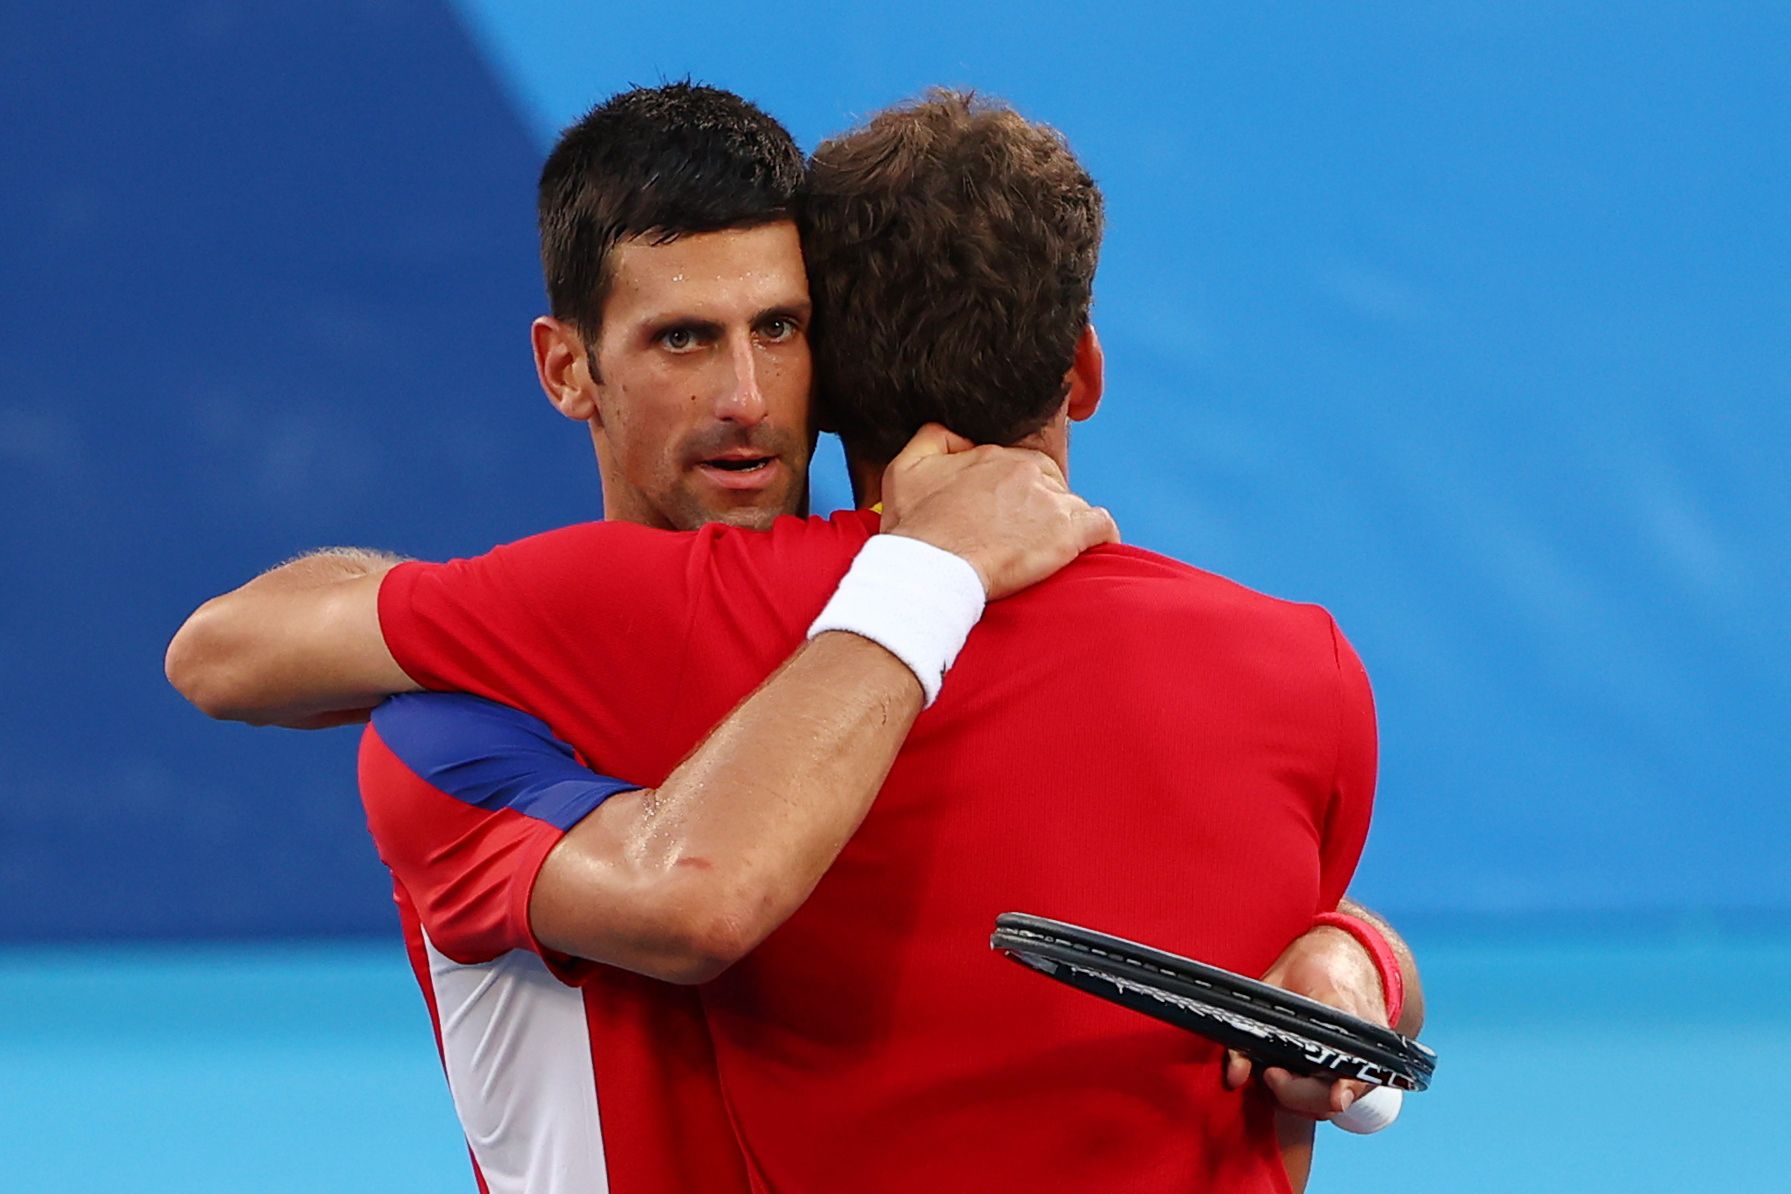 How to lose with honor?  Djokovic broke the heart of the compatriot, he is under fire for his behavior